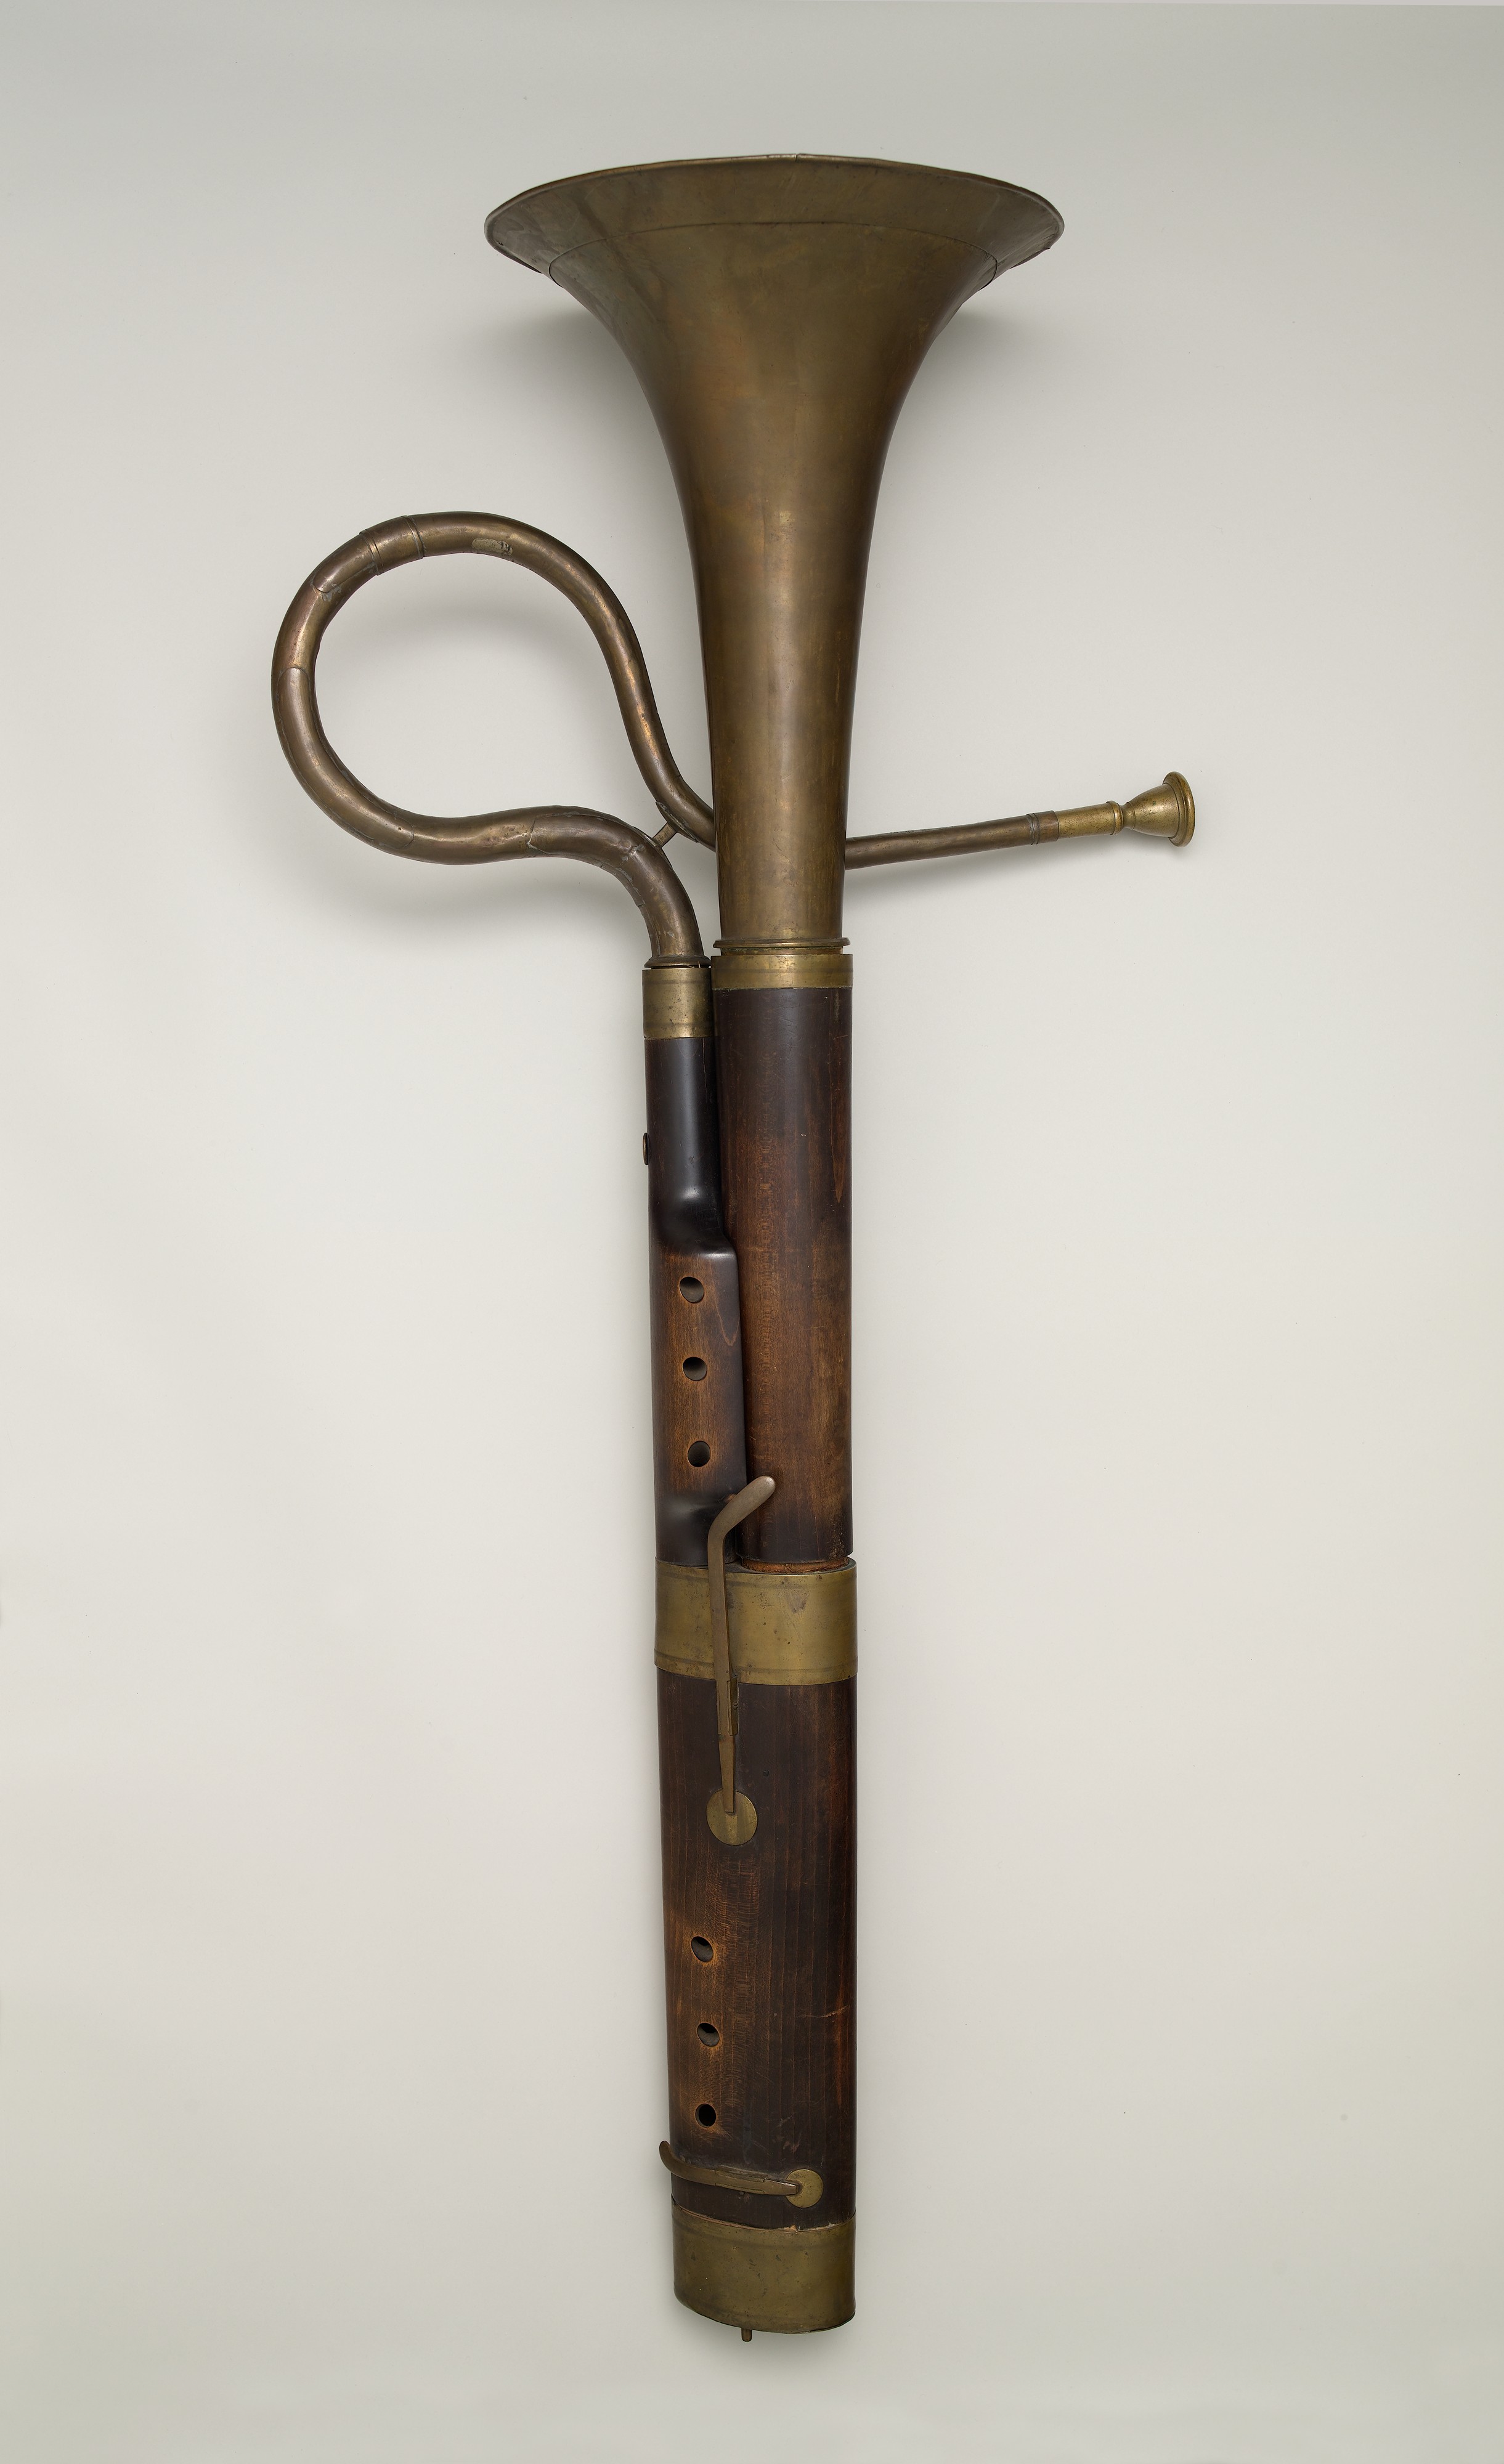 Russian Bassoon (Bass Horn), probably French